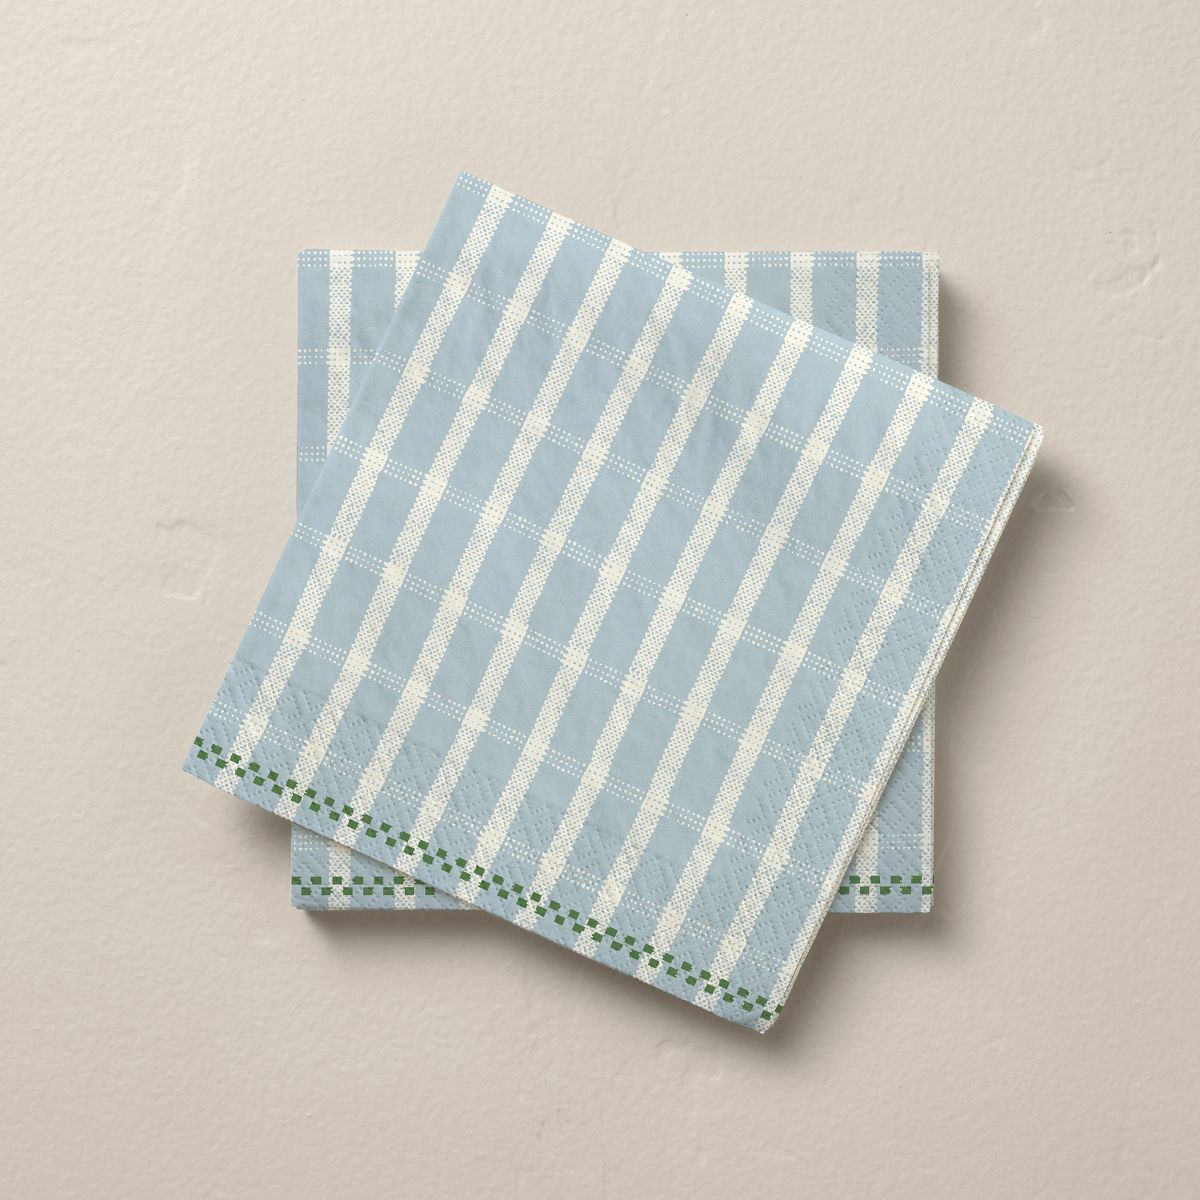 14ct Checkered Plaid Paper Lunch Napkins Cream/Light Blue/Green - Hearth & Hand™ with Magnolia | Target